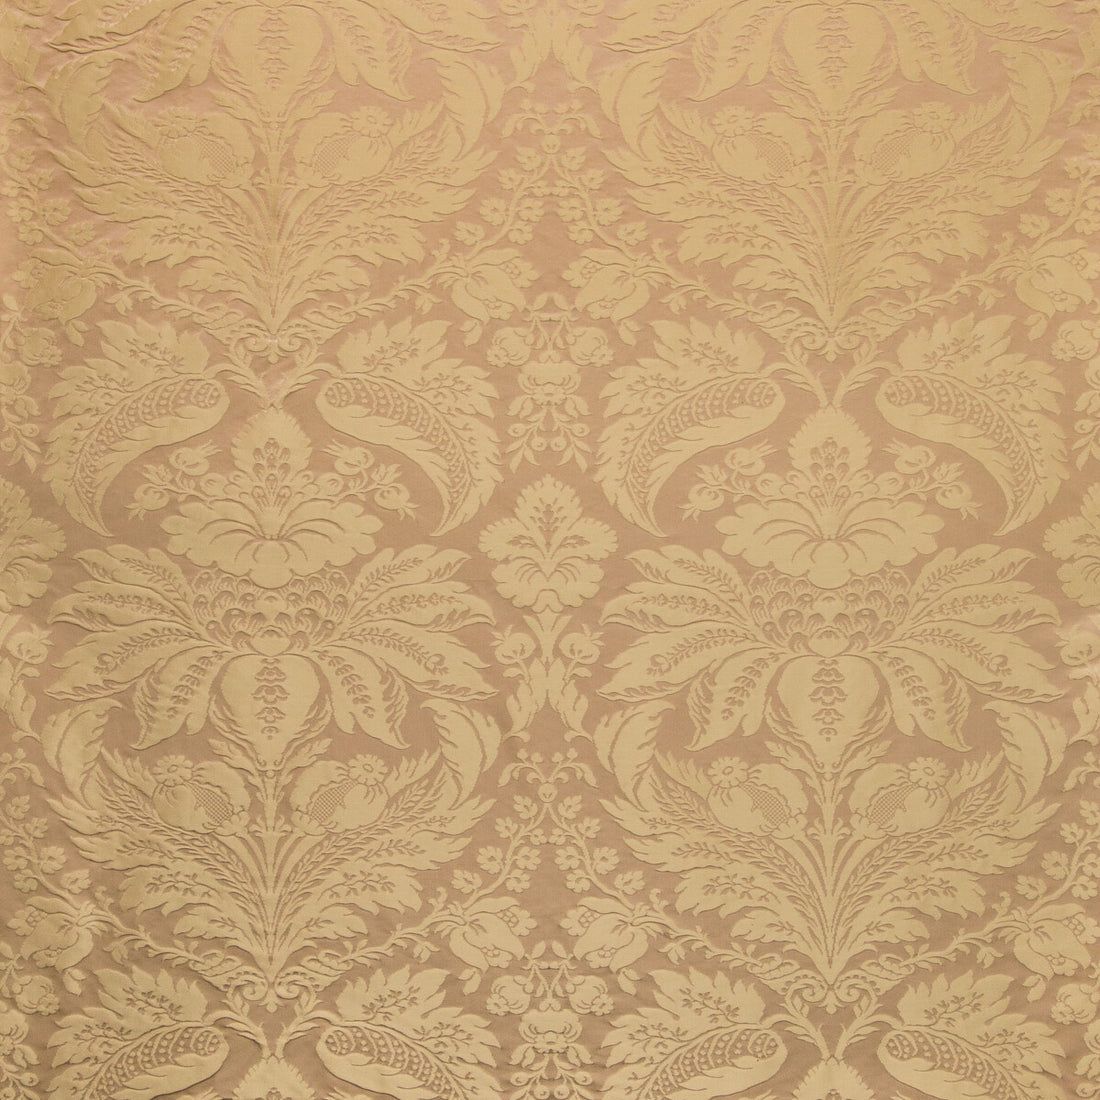 Damask Pierre fabric in wheat color - pattern 8013188.616.0 - by Brunschwig &amp; Fils in the B&amp;F Showroom Exclusive 2019 collection